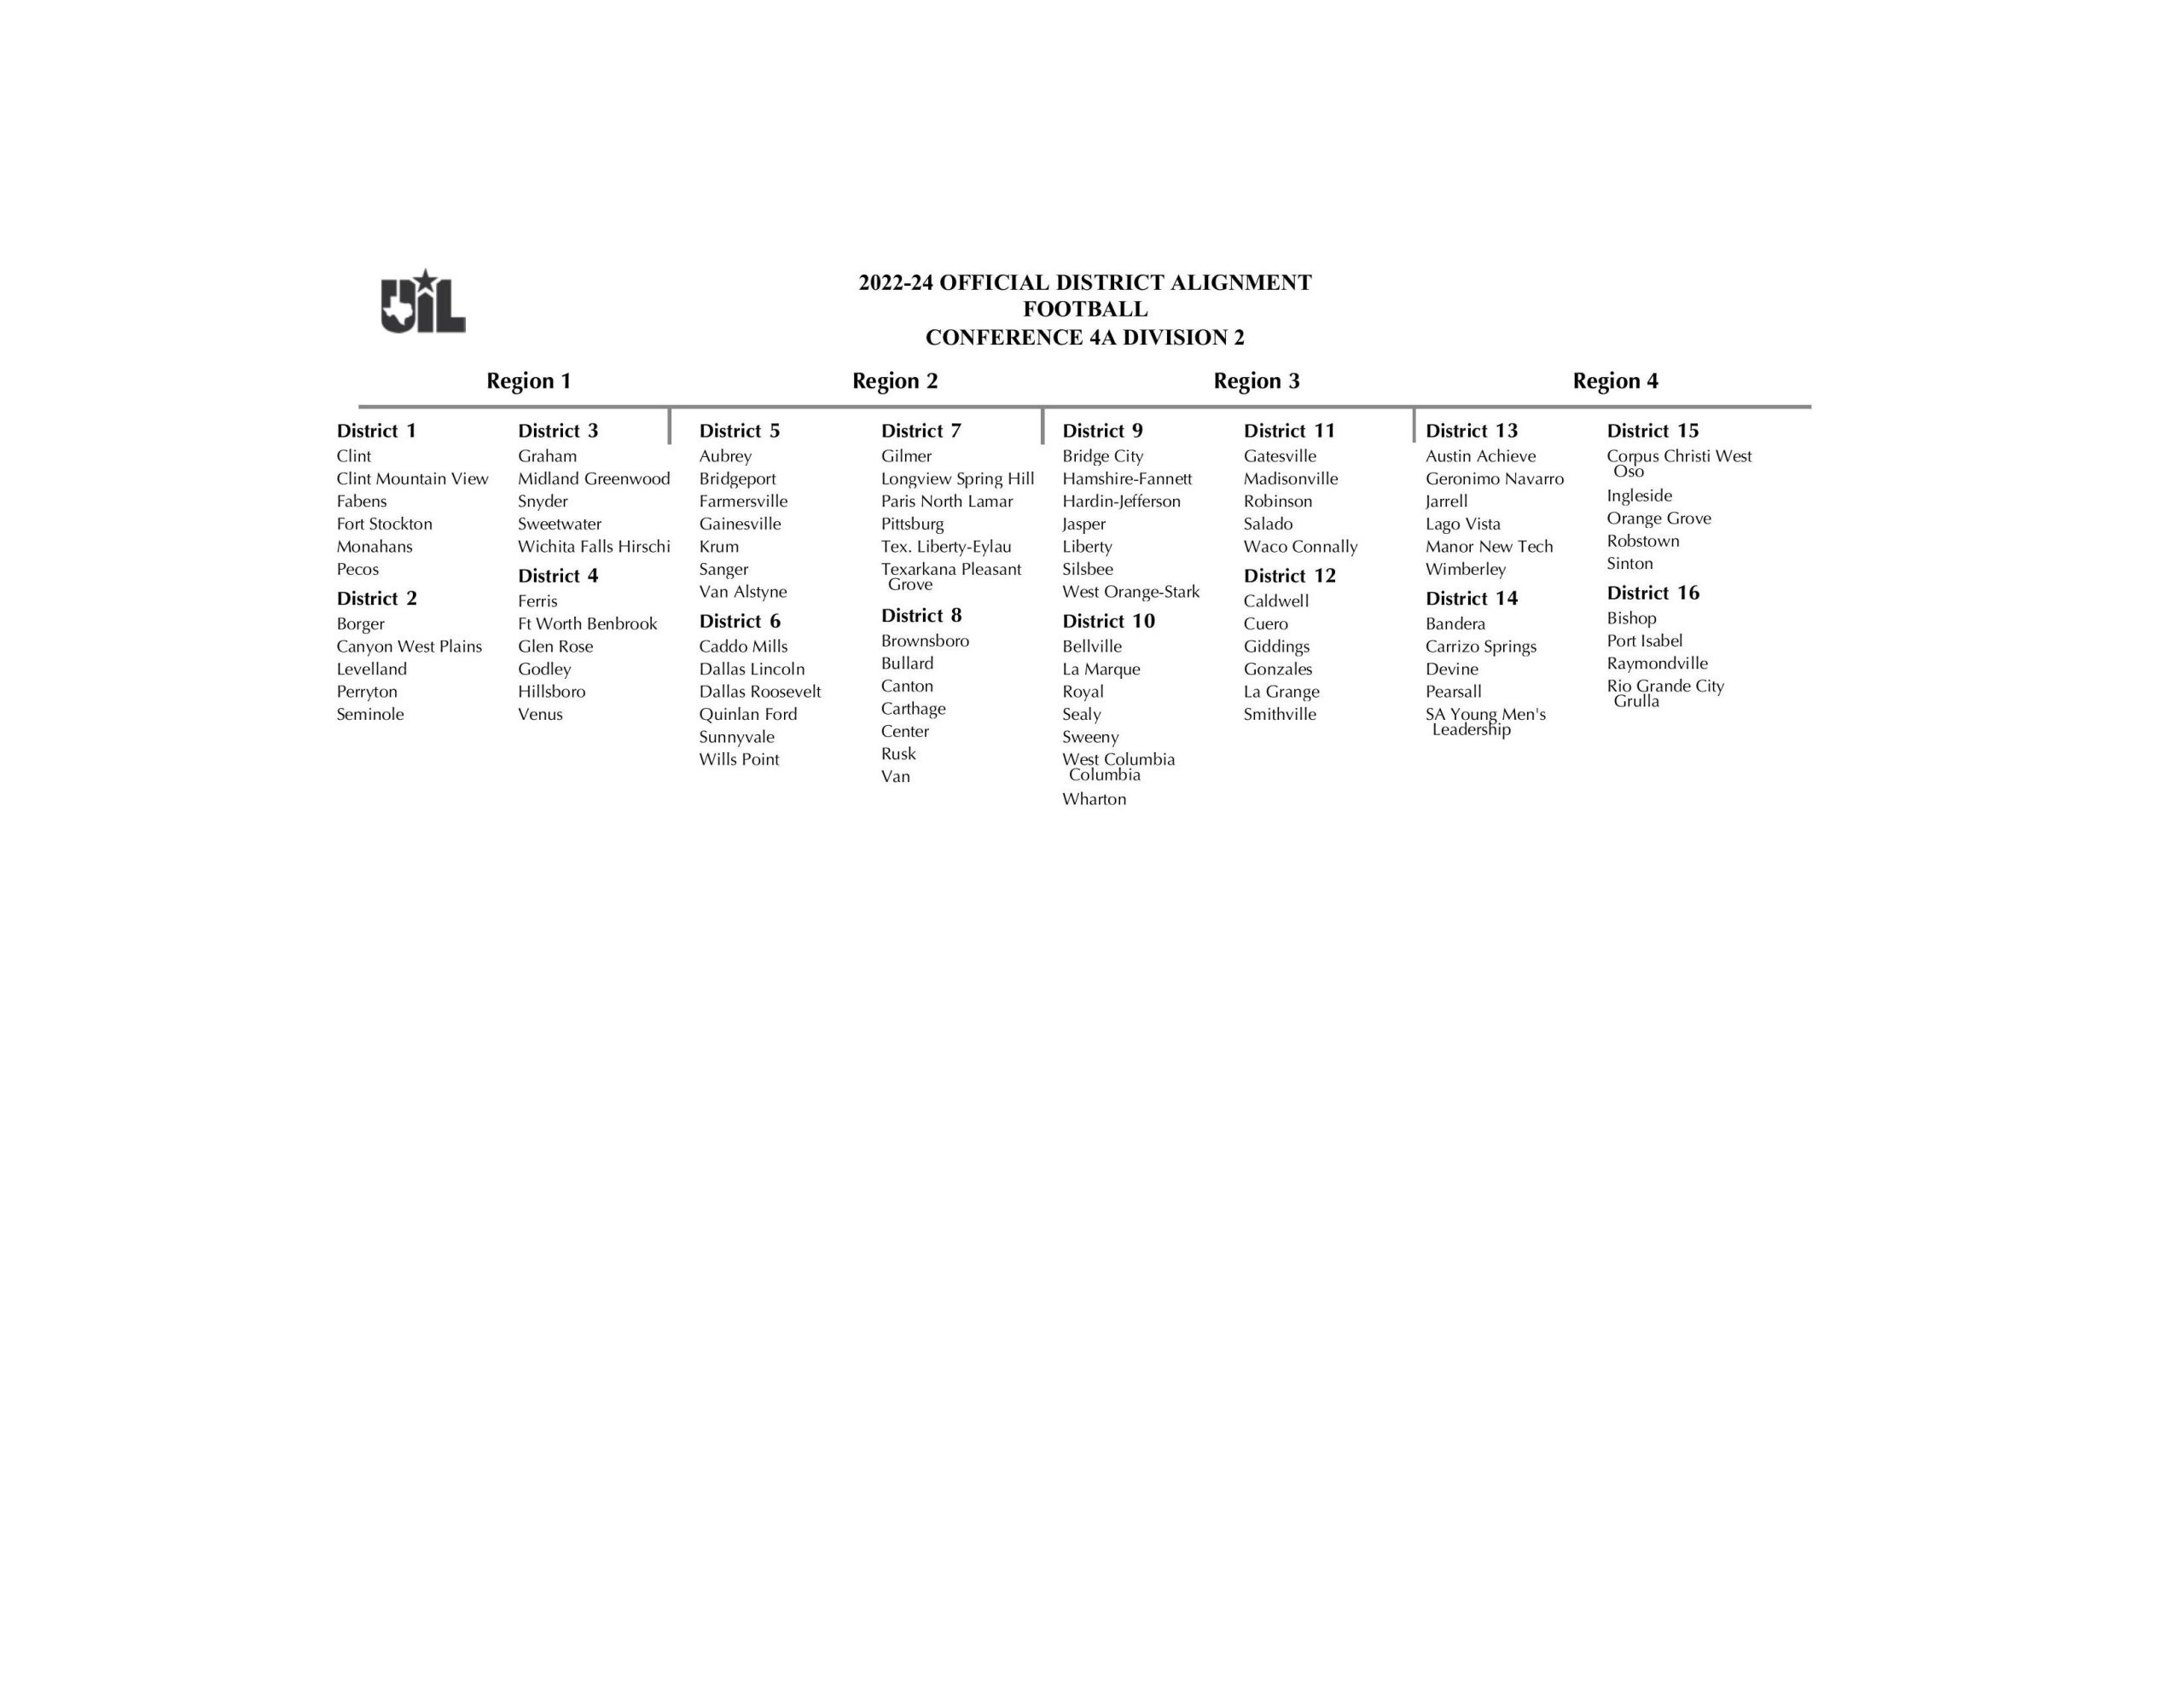 UIL Texas HS Football Reclassification and Realignment